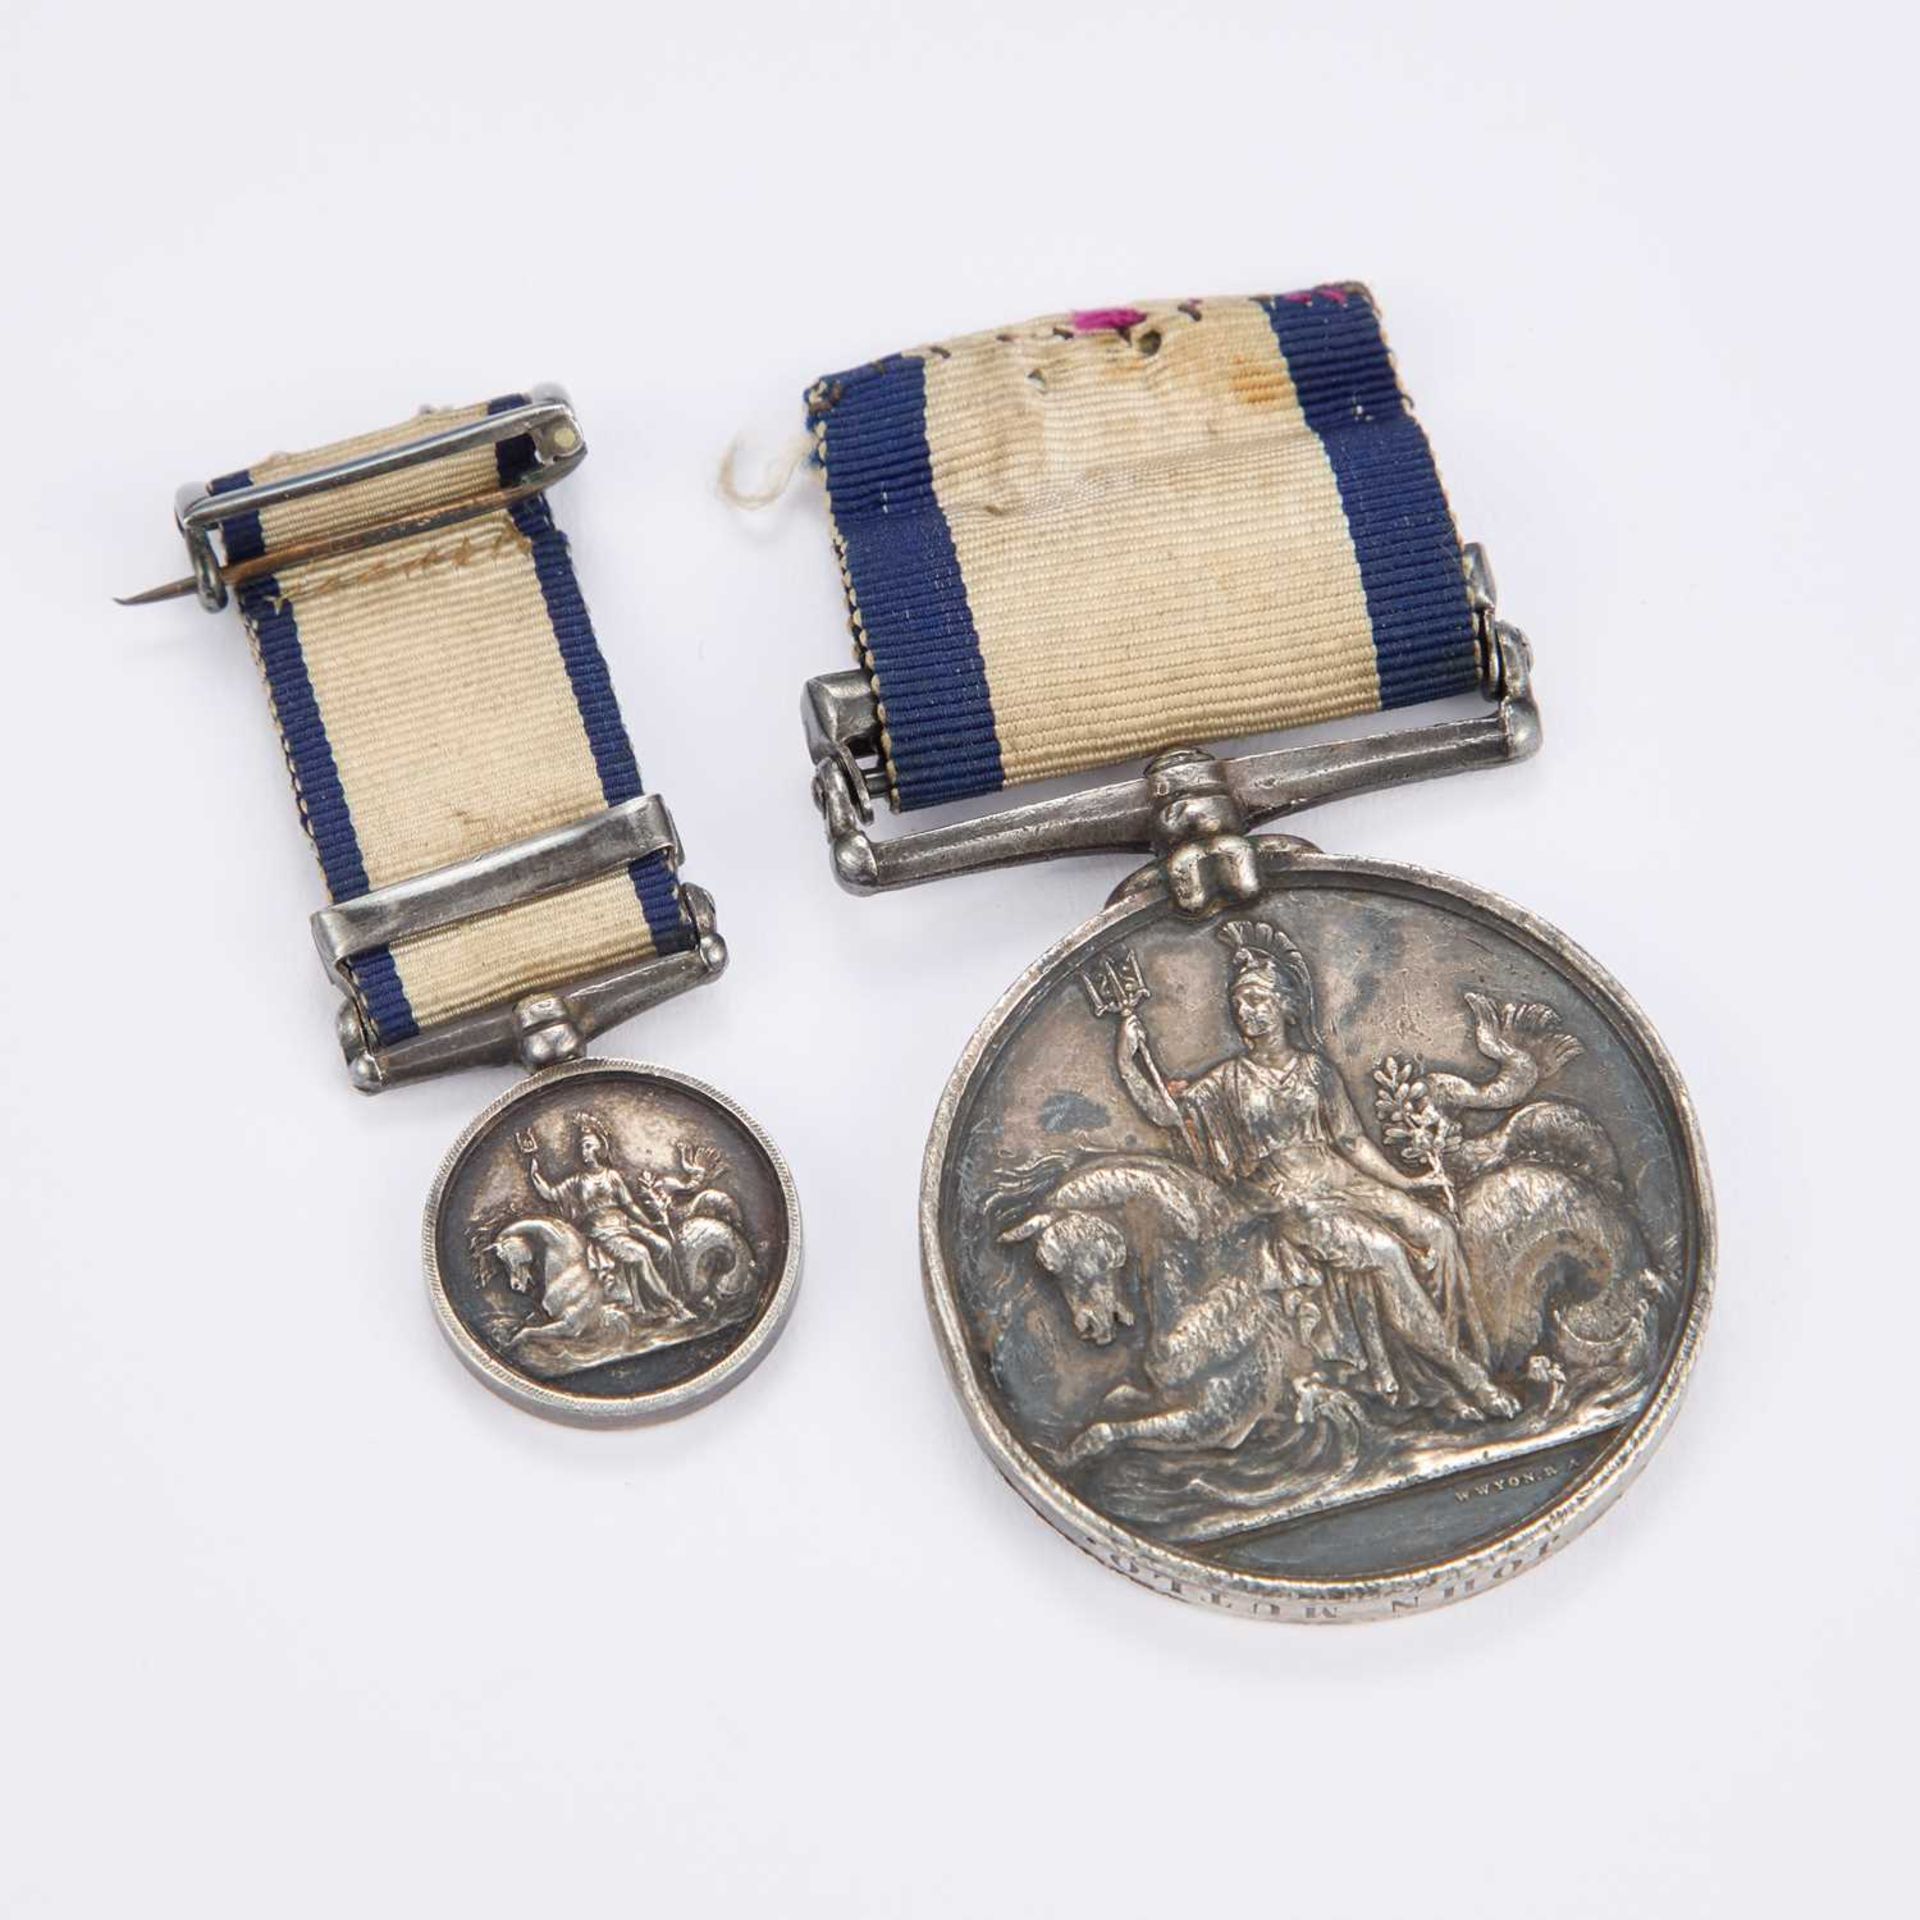 A NAVAL GENERAL SERVICE MEDAL 1793-1840, WITH MINIATURE MEDAL - Image 2 of 3